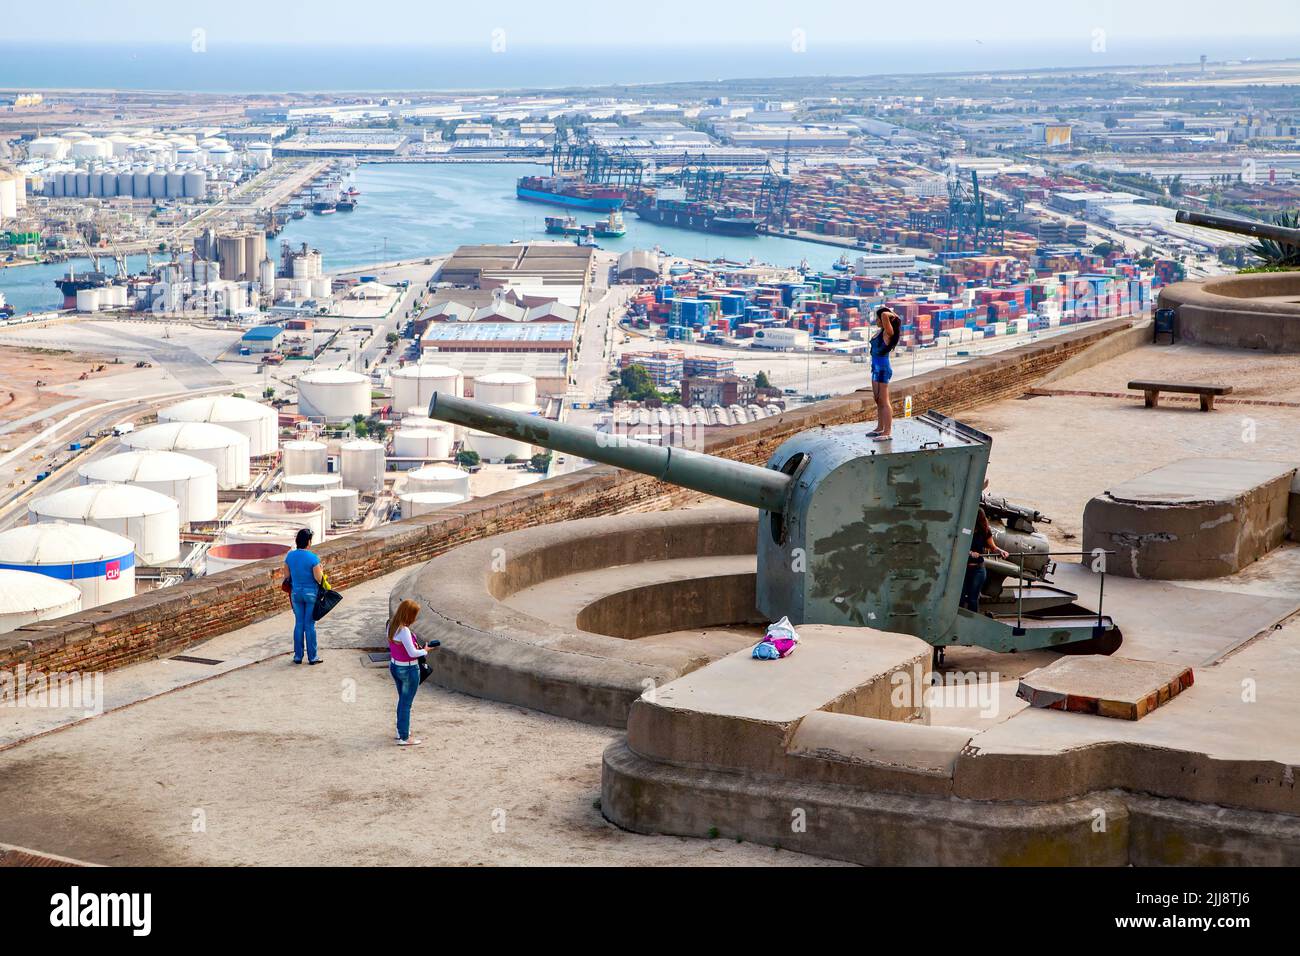 Barcelona, Spain - June 11, 2011: Panoramic view with old cannon in Montjuic fortress and cargo port of Barcelona Stock Photo